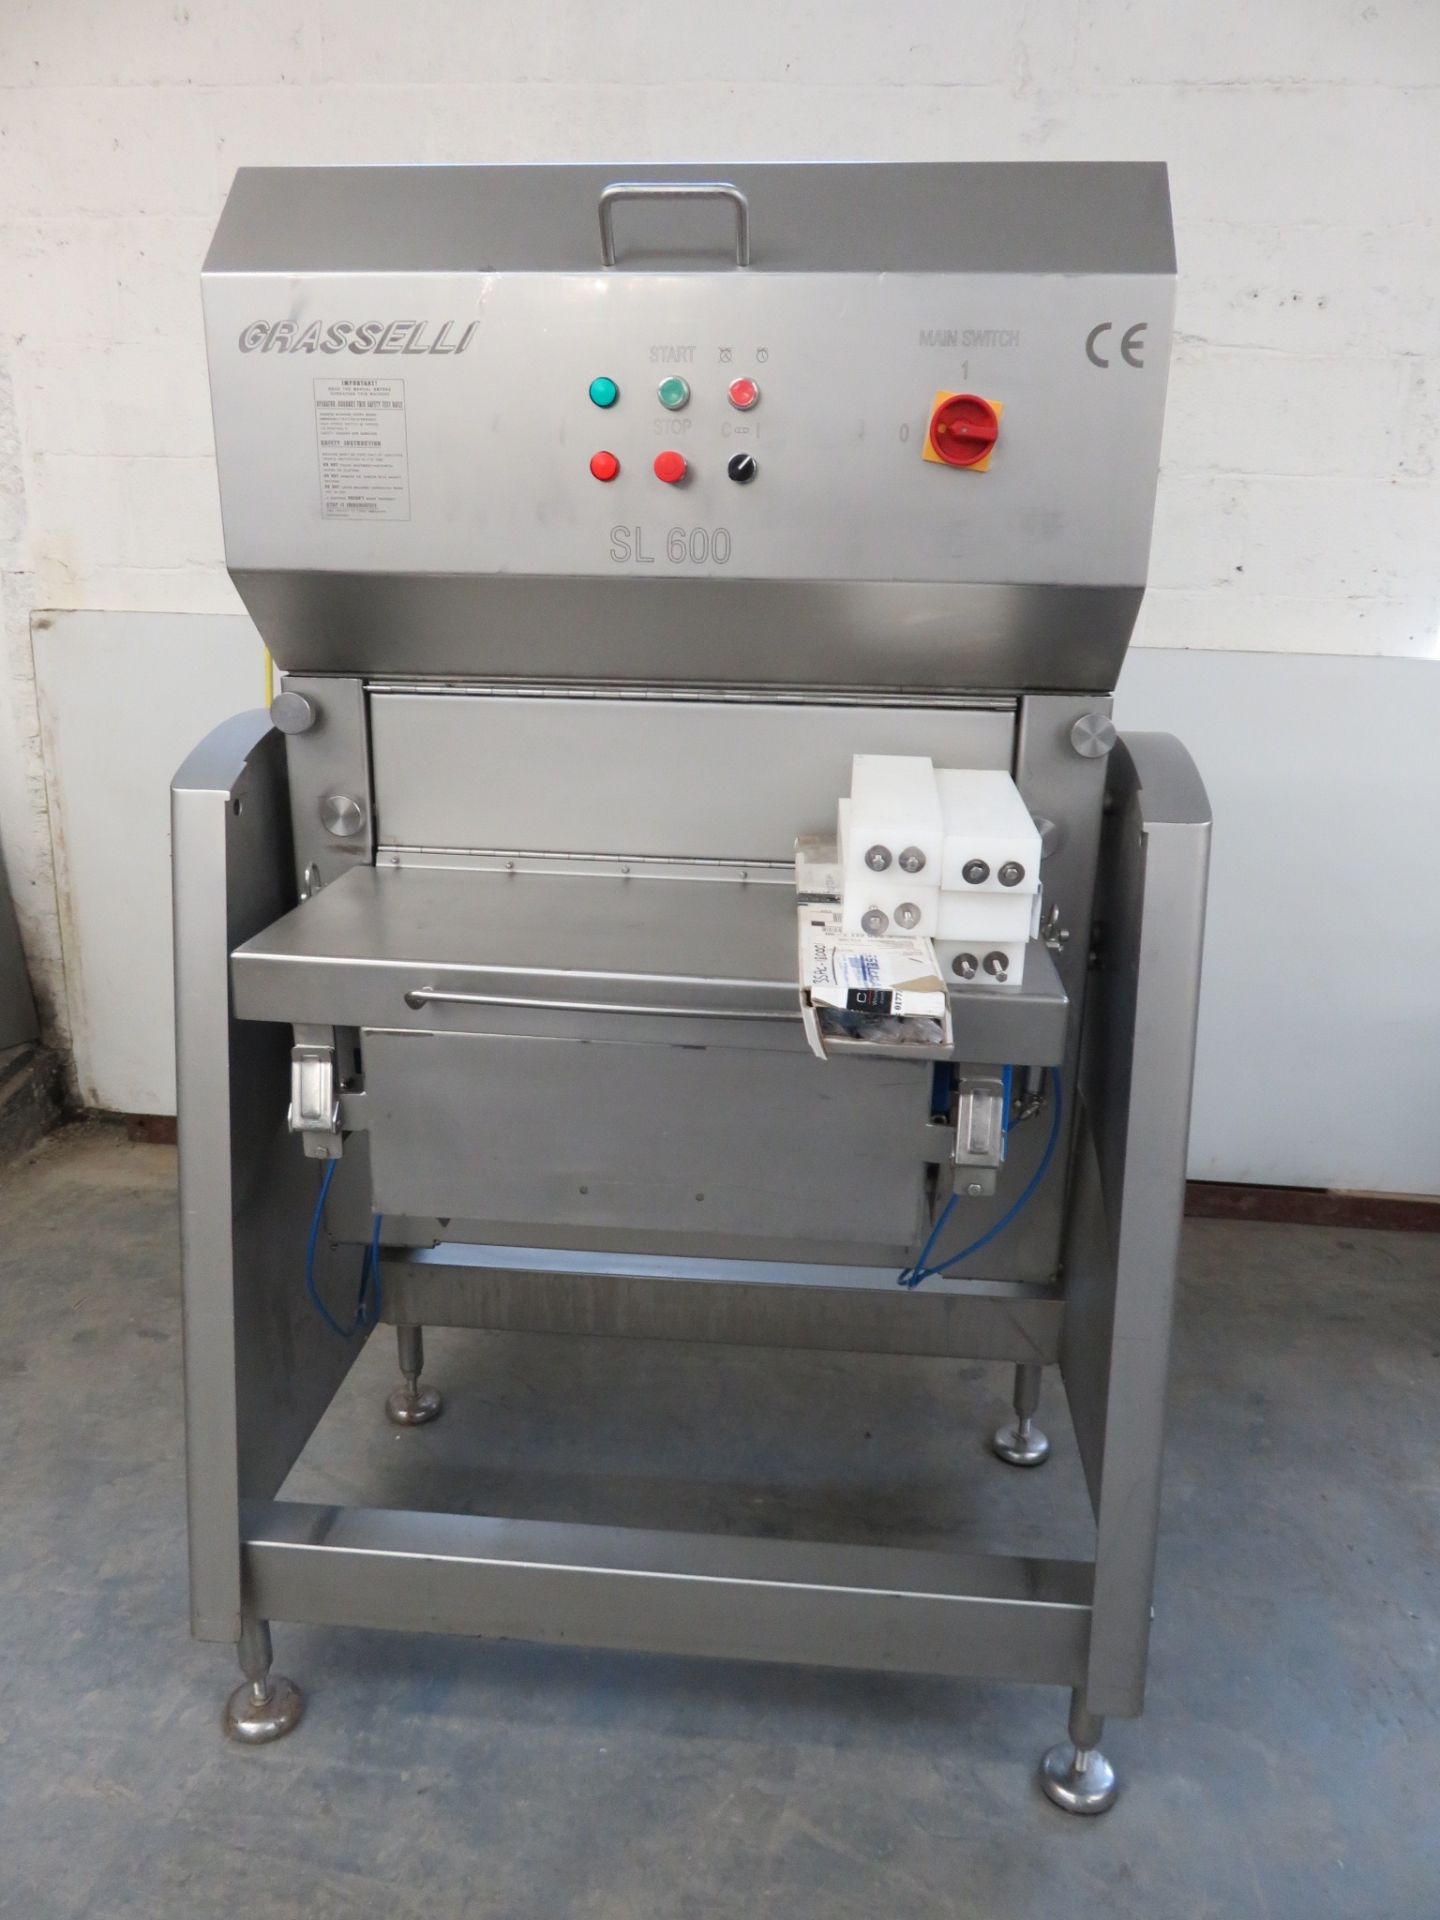 Graselli SL600 fully automatic Slicer COMPLETE WITH BRAND SET OF BLADES,Totally S/s FULLY WORKING - Image 2 of 6